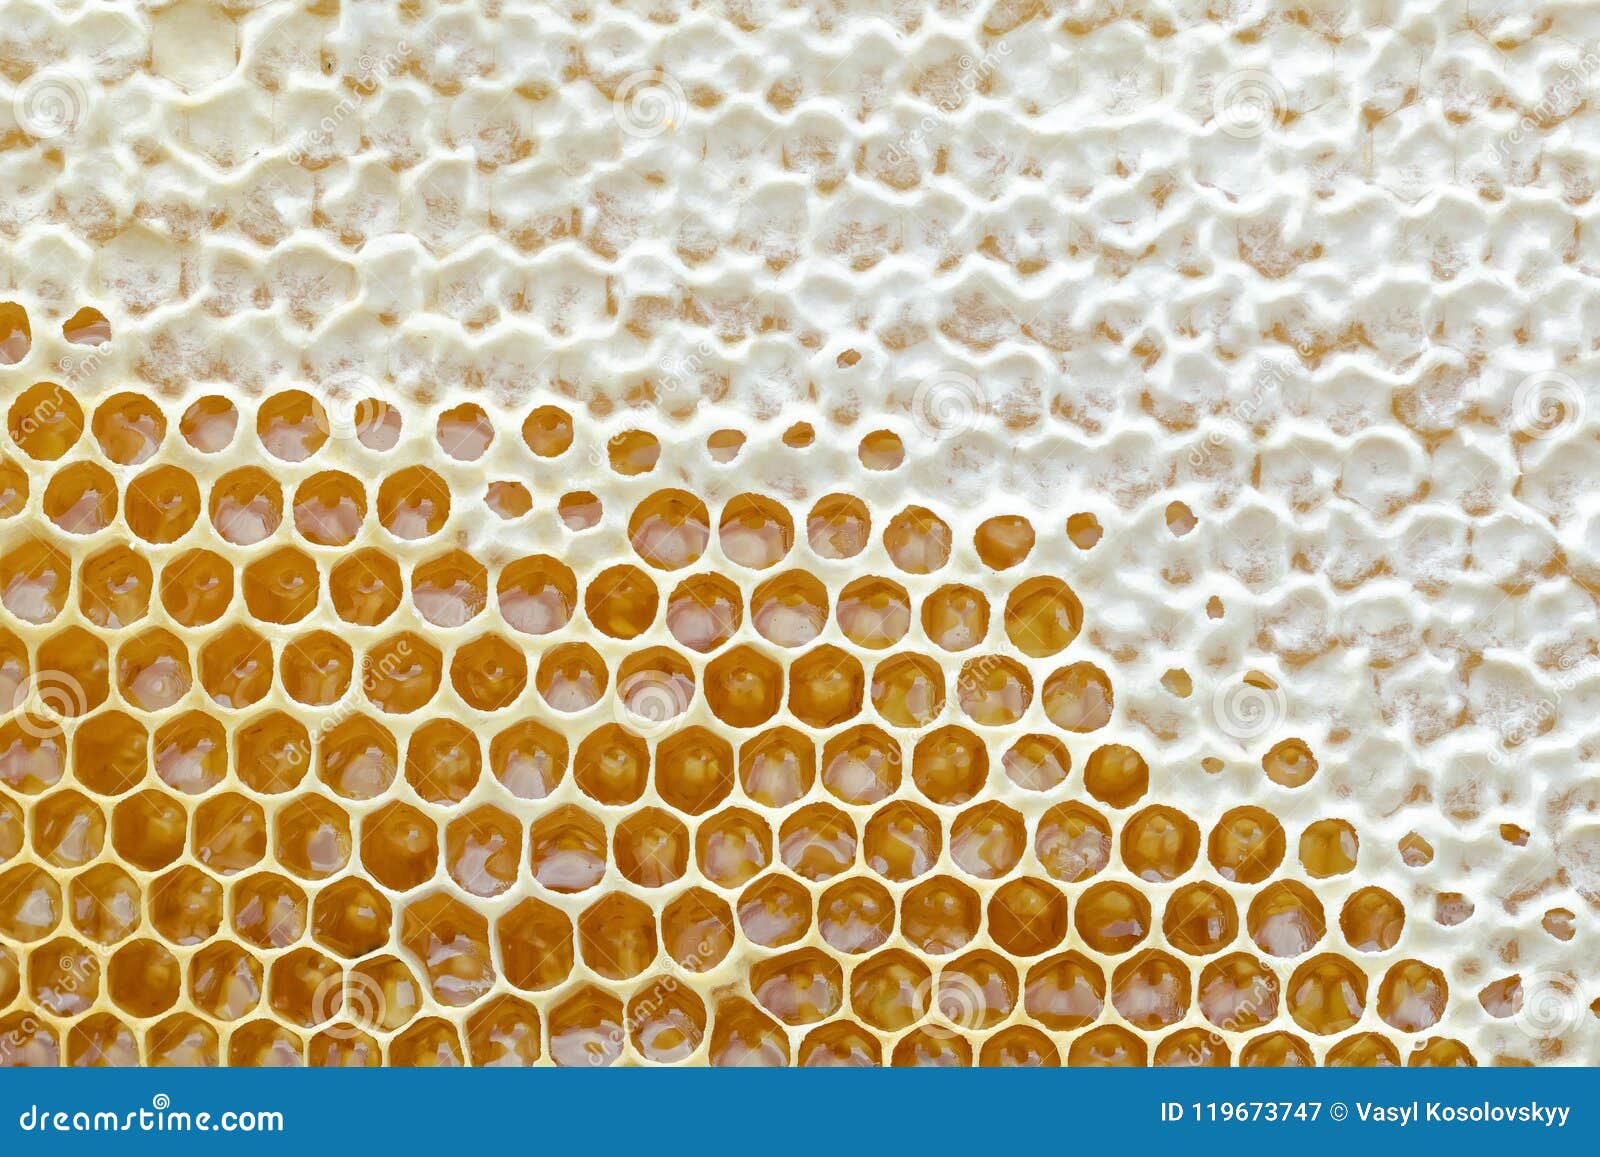 honeycomb from a bee hive filled with golden honey in a full frame view. background texture.